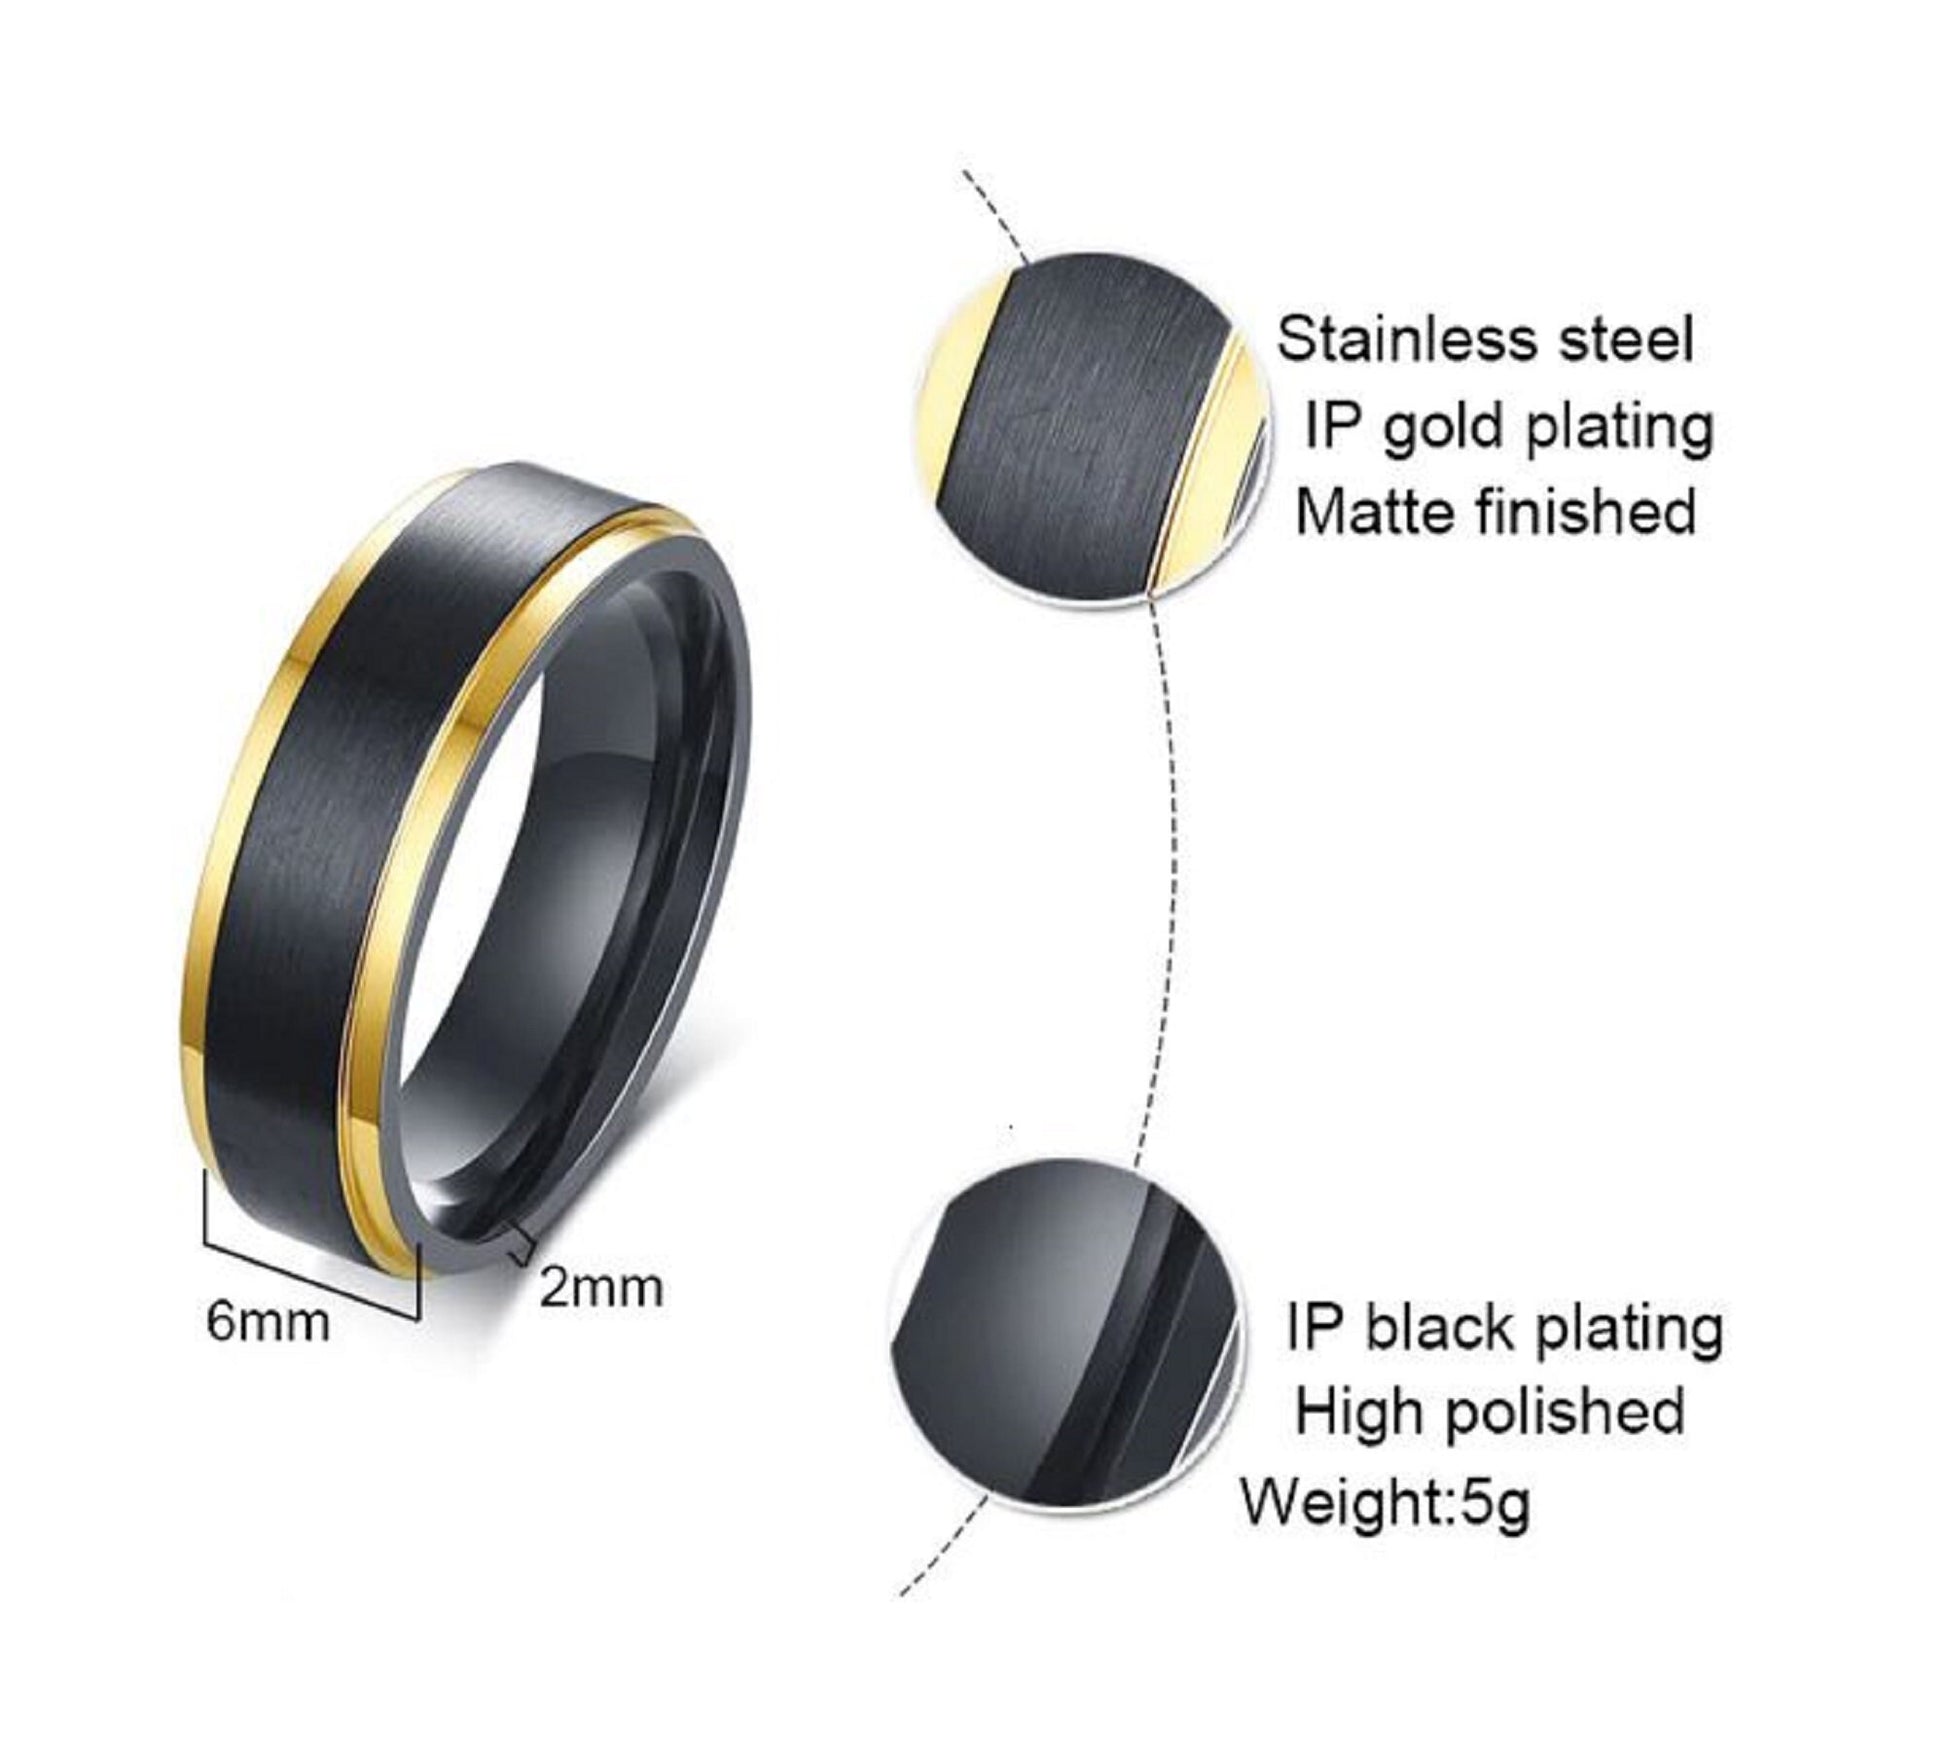 Men's Matte Black Tail Ring Stainless Steel Gold Line Edge & Unique Black Brushed Surface